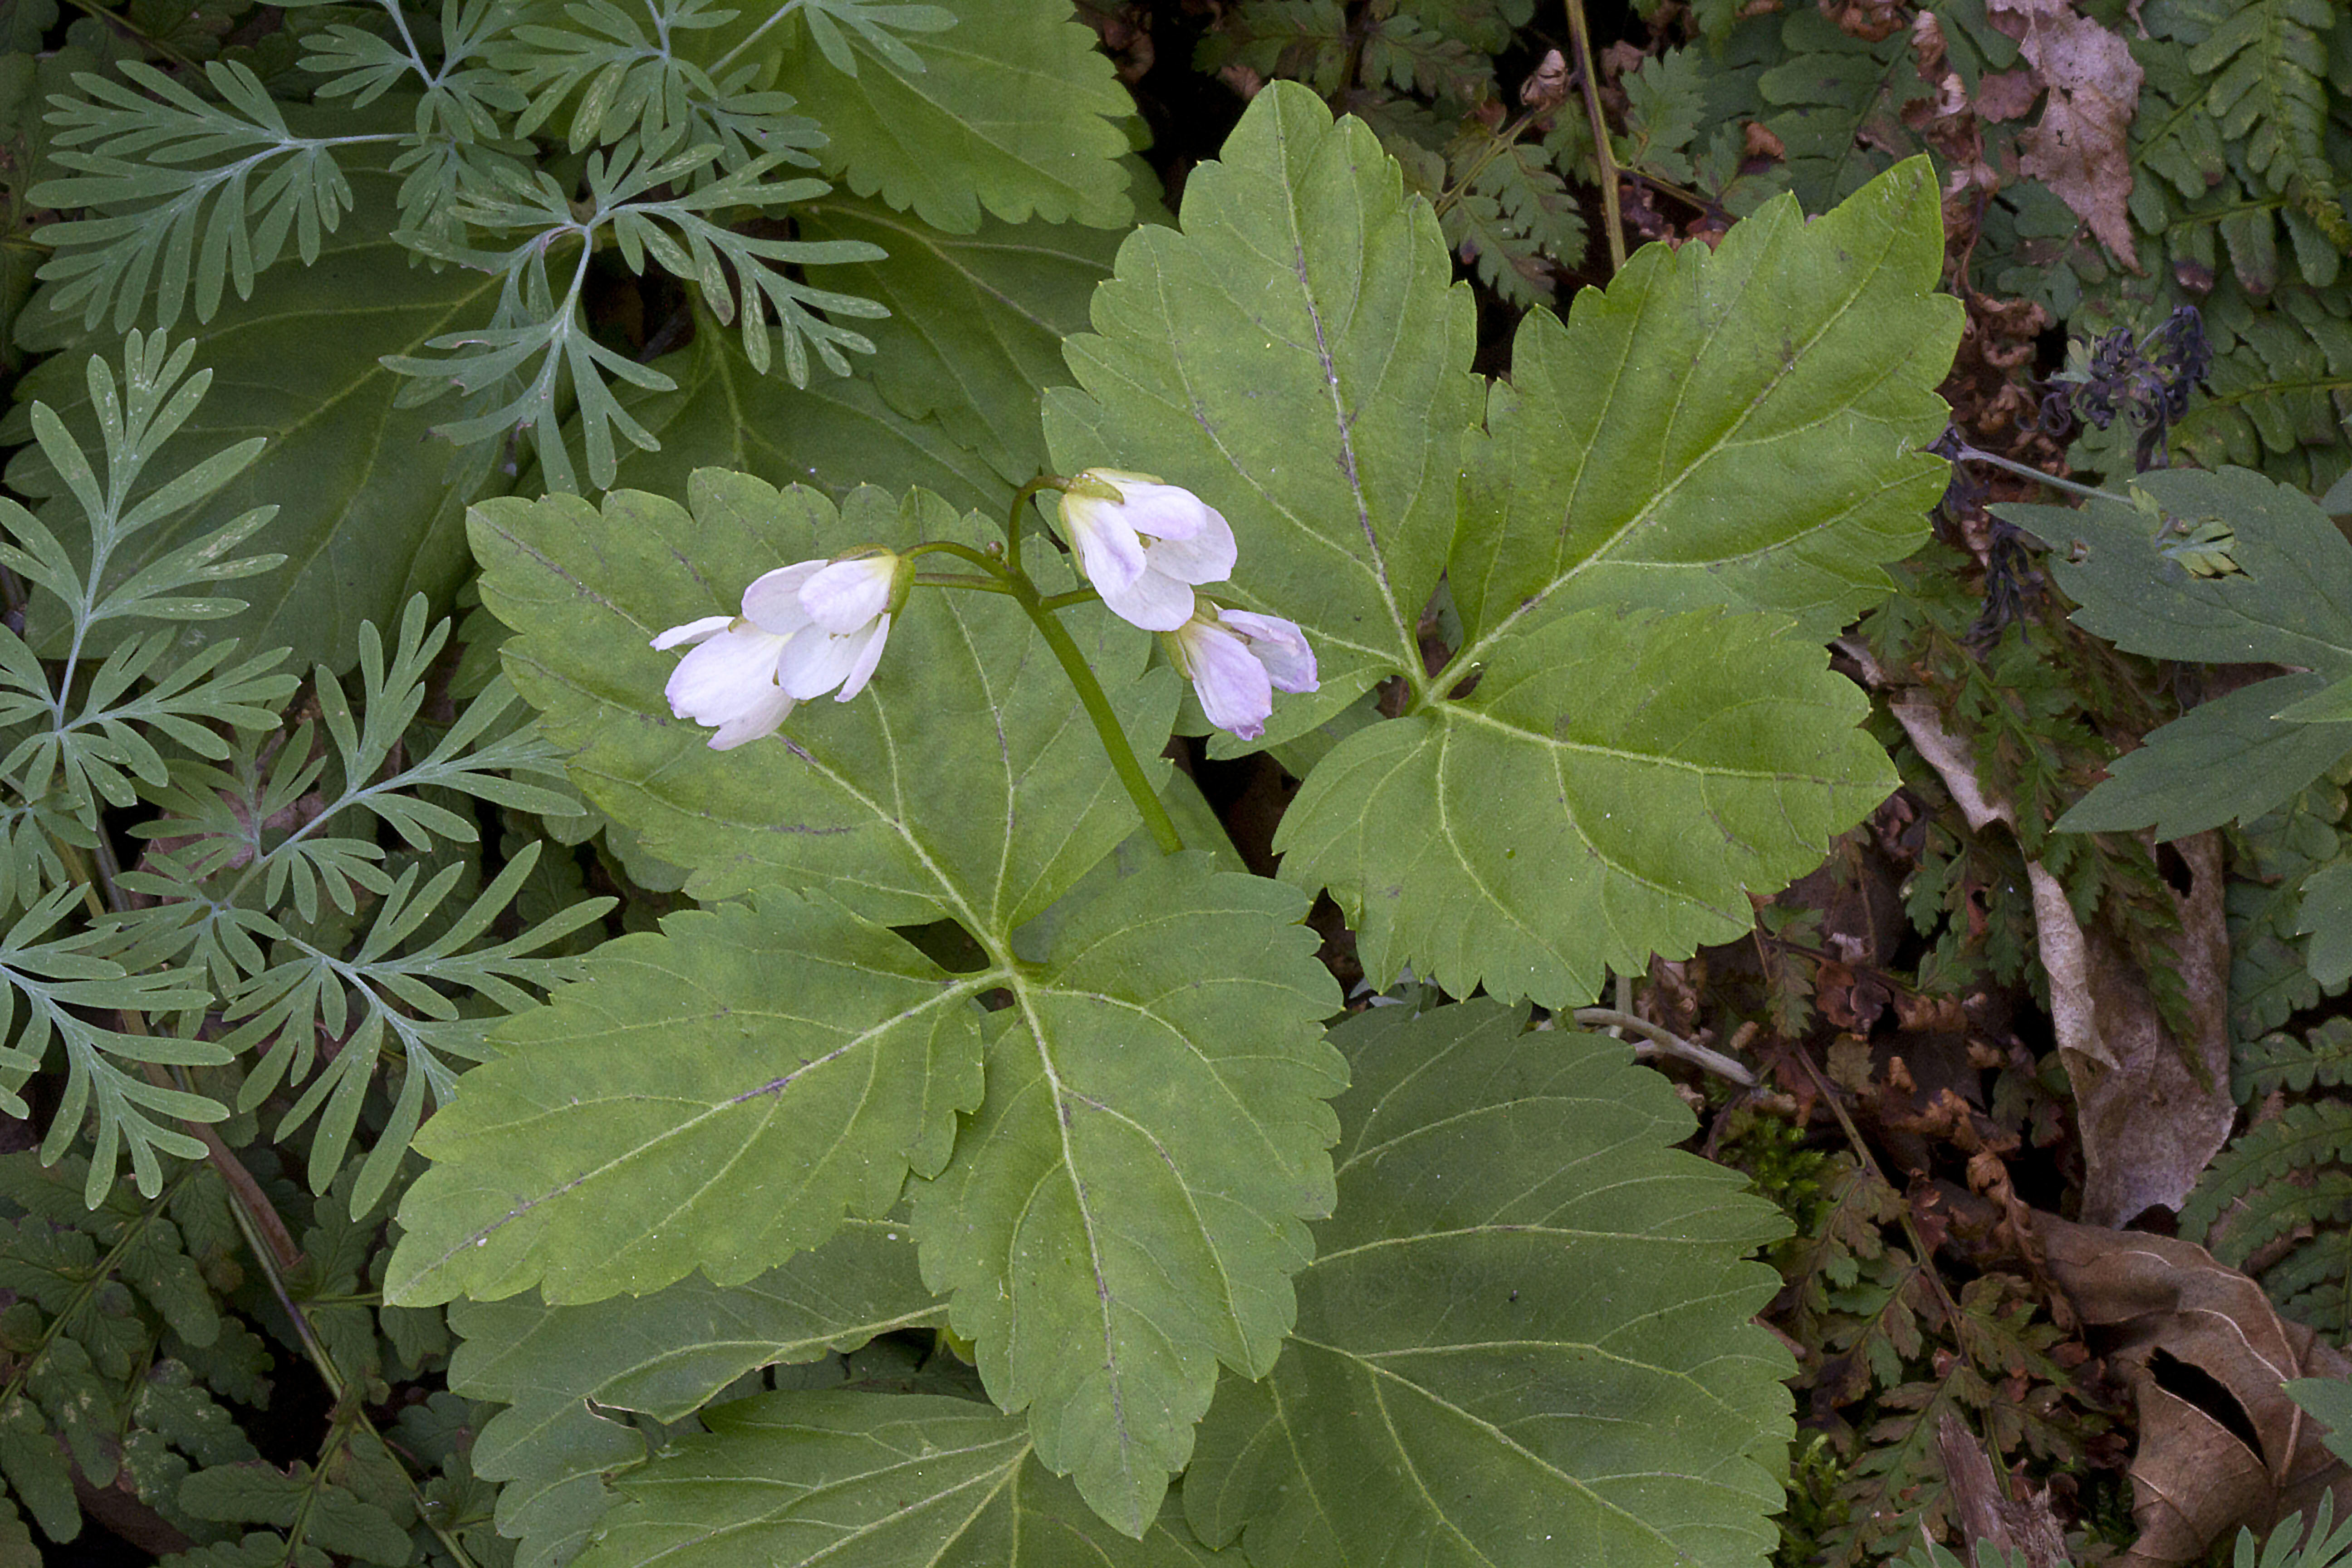 Cut-leaved or broad-leaved toothwort (Cardamine diphylla)